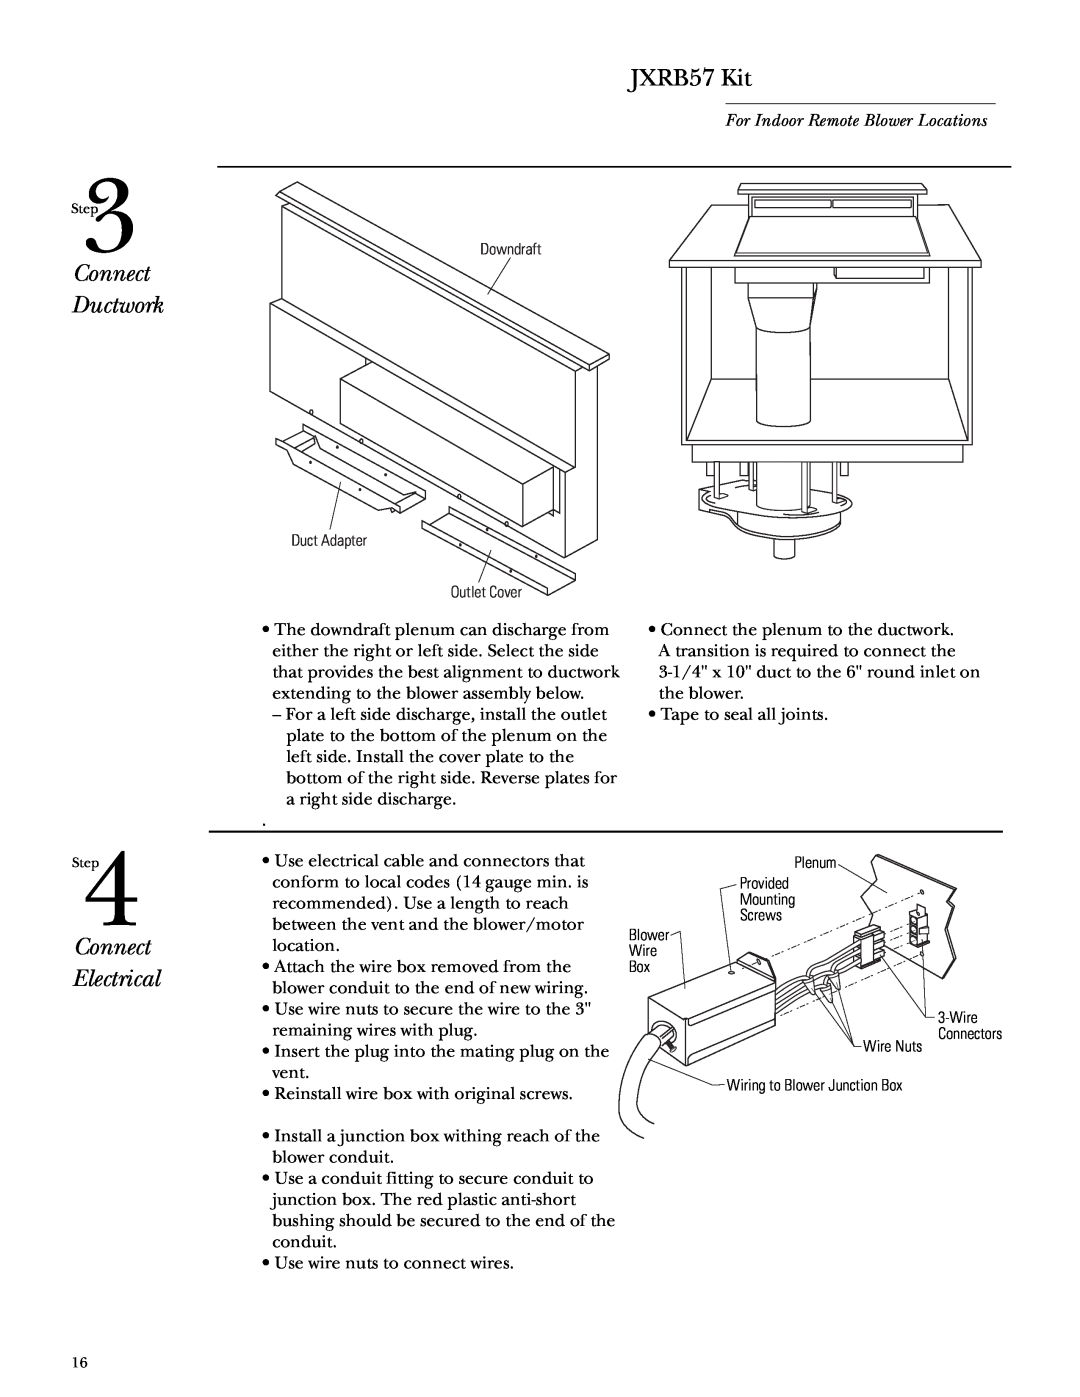 GE Monogram ZGU365 installation instructions Connect Ductwork, Connect Electrical, JXRB57 Kit 